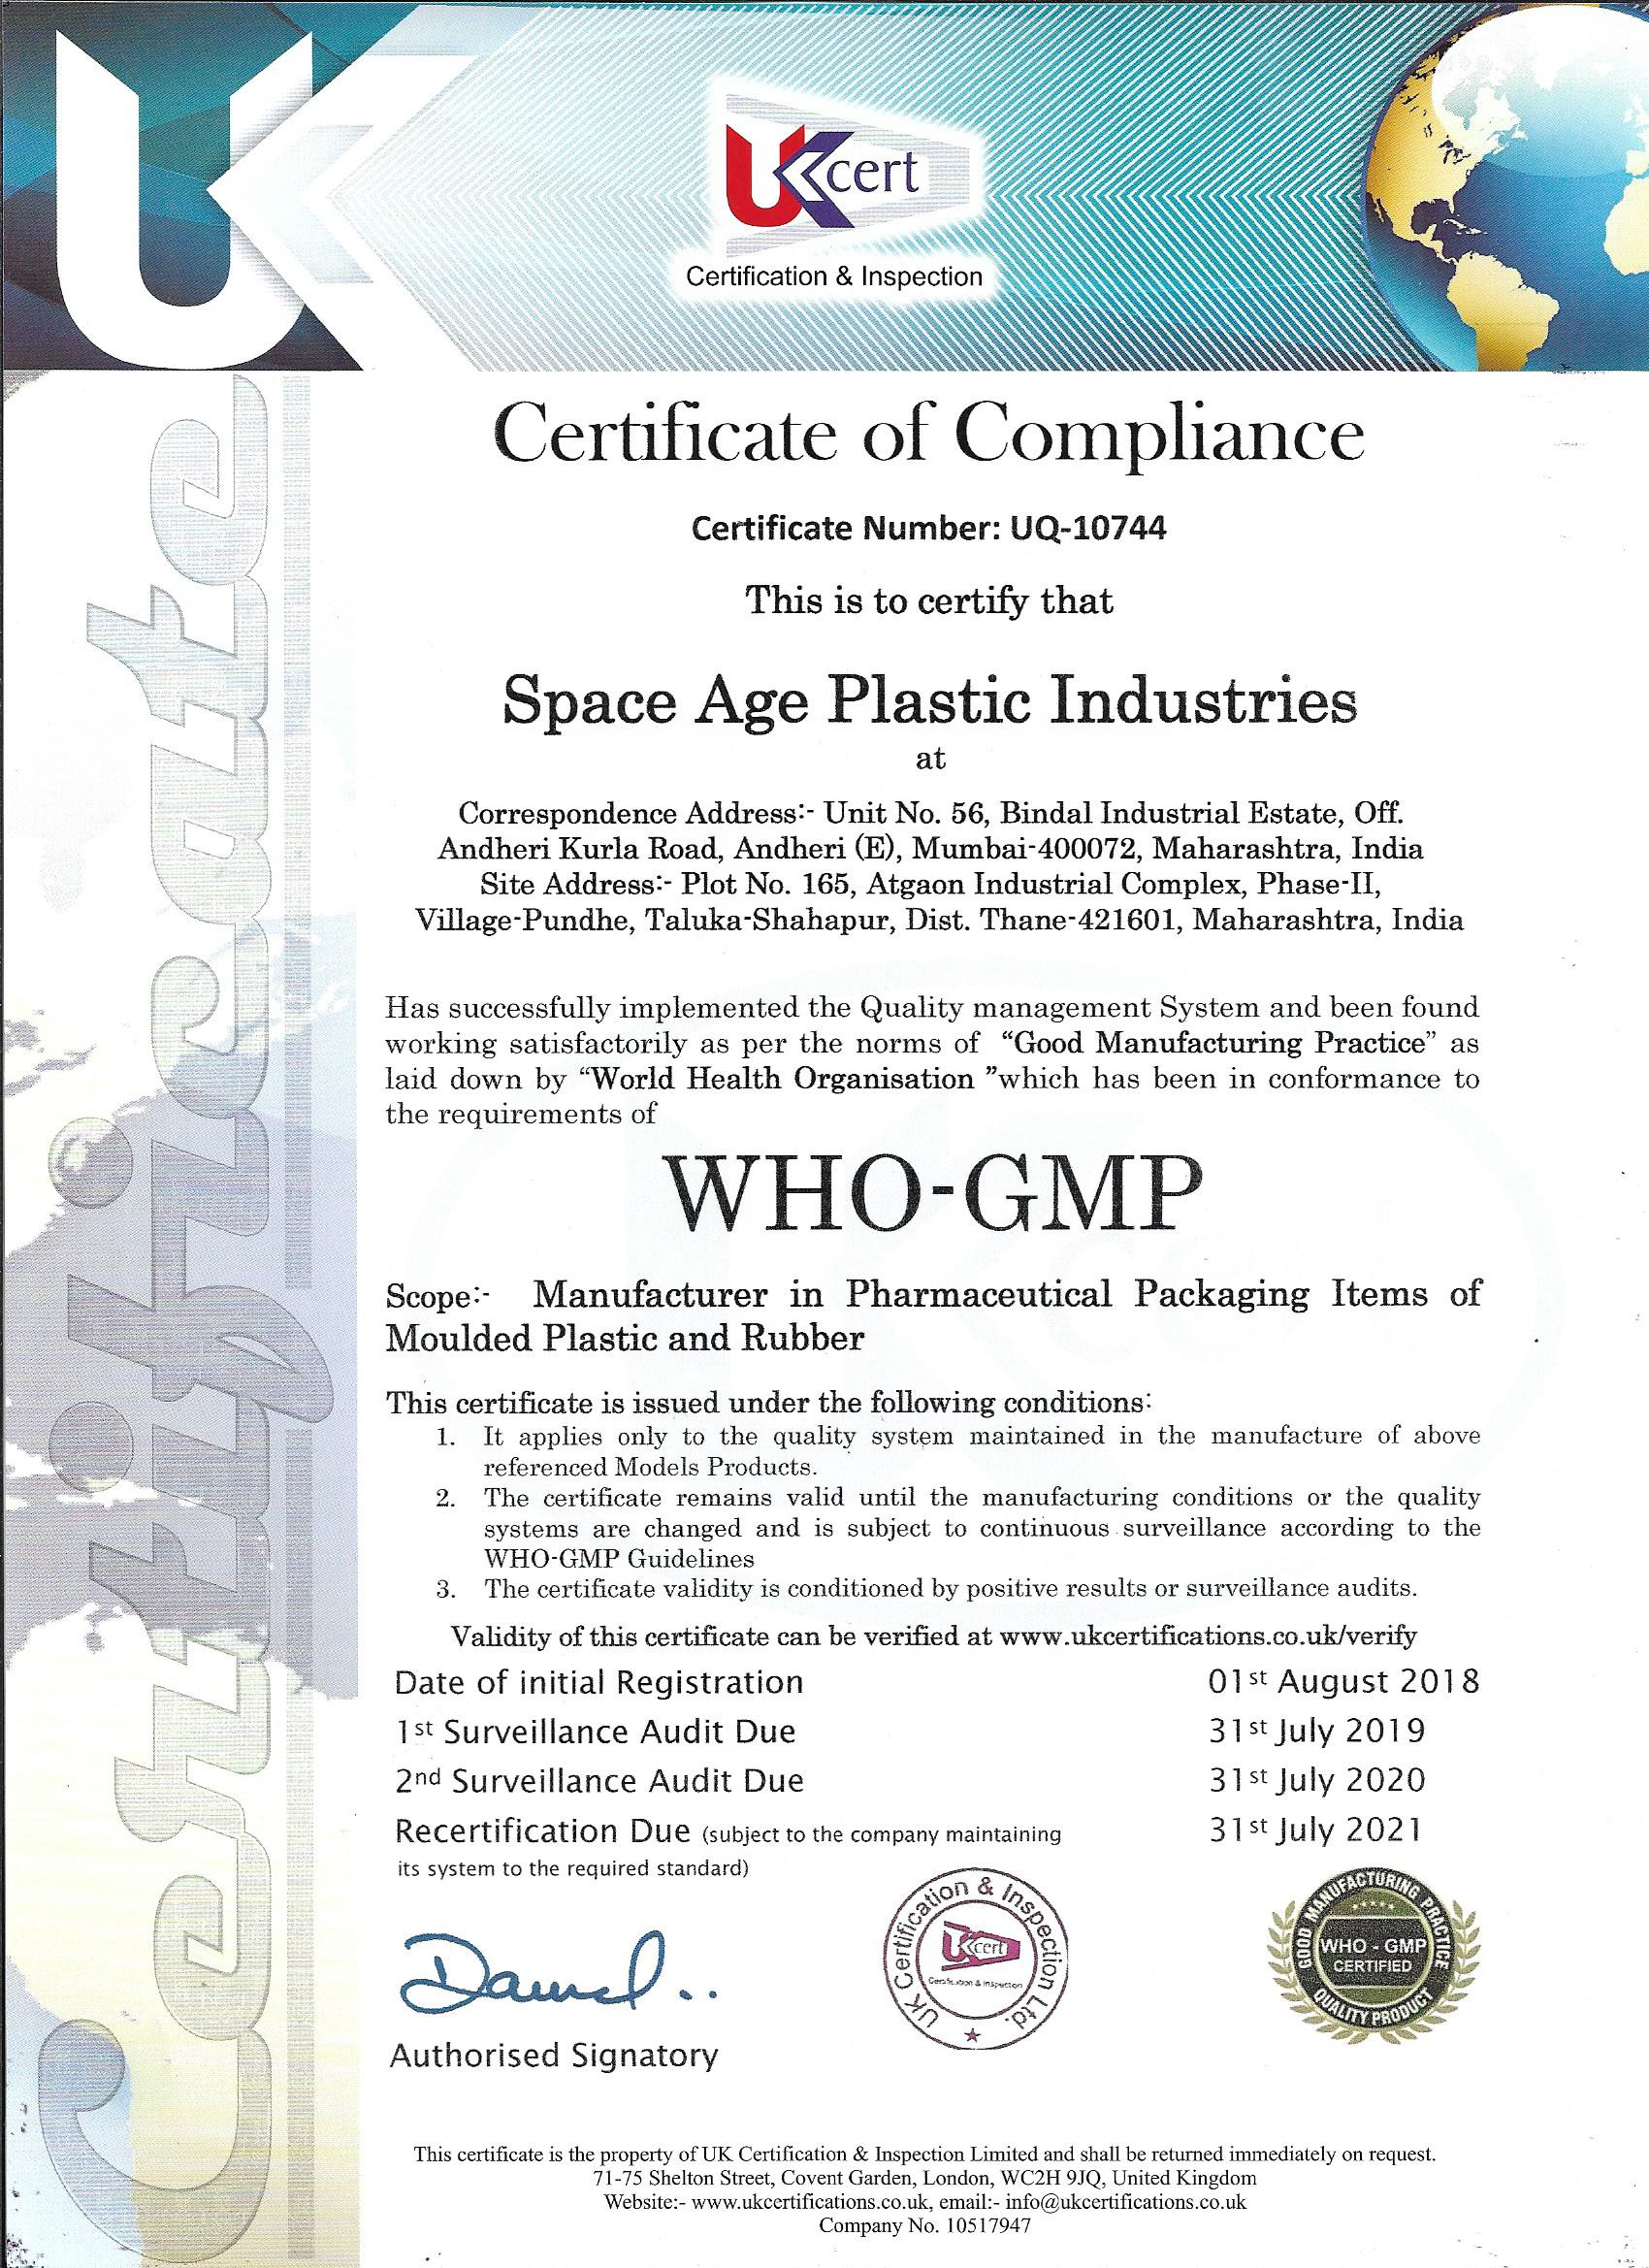 certificate-of-compliance-for-space-age-plastic-industries